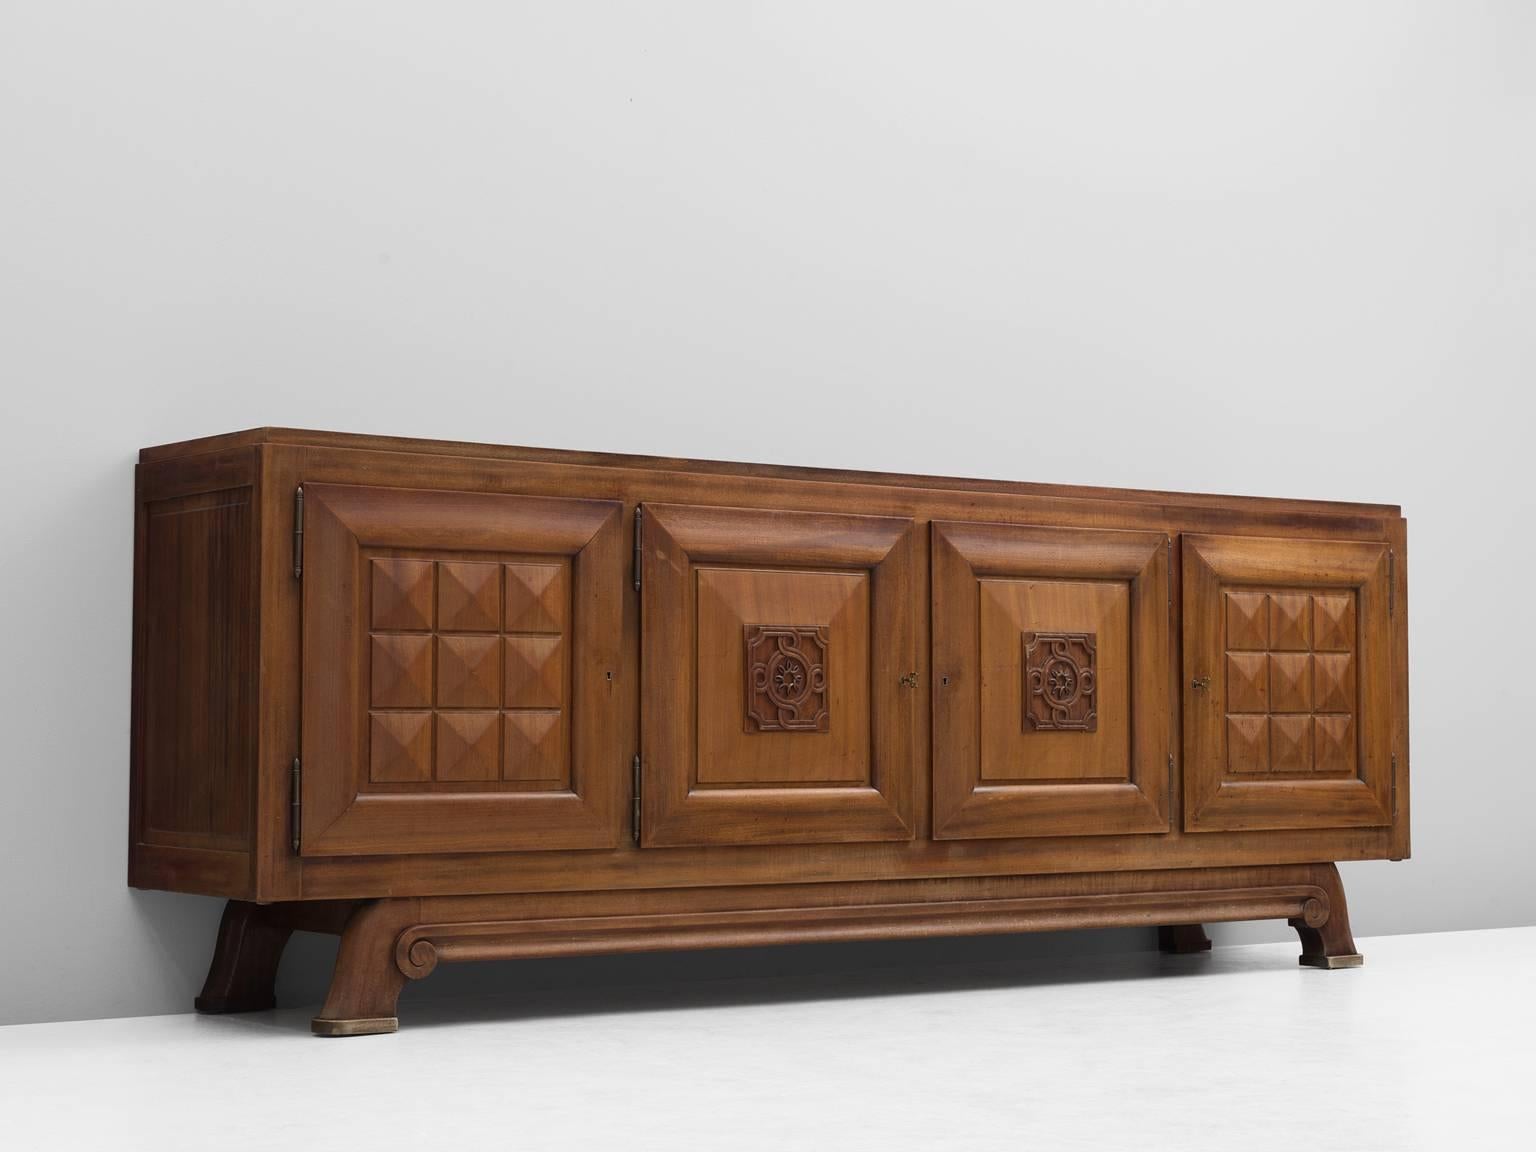 Gaston Poisson, credenza in mahogany, France, 1930s.

Sturdy credenza in with graphical door panels and parquet top. This four-door sideboard is equipped with several shelves and drawers which provide plenty of storage space. The shelves are